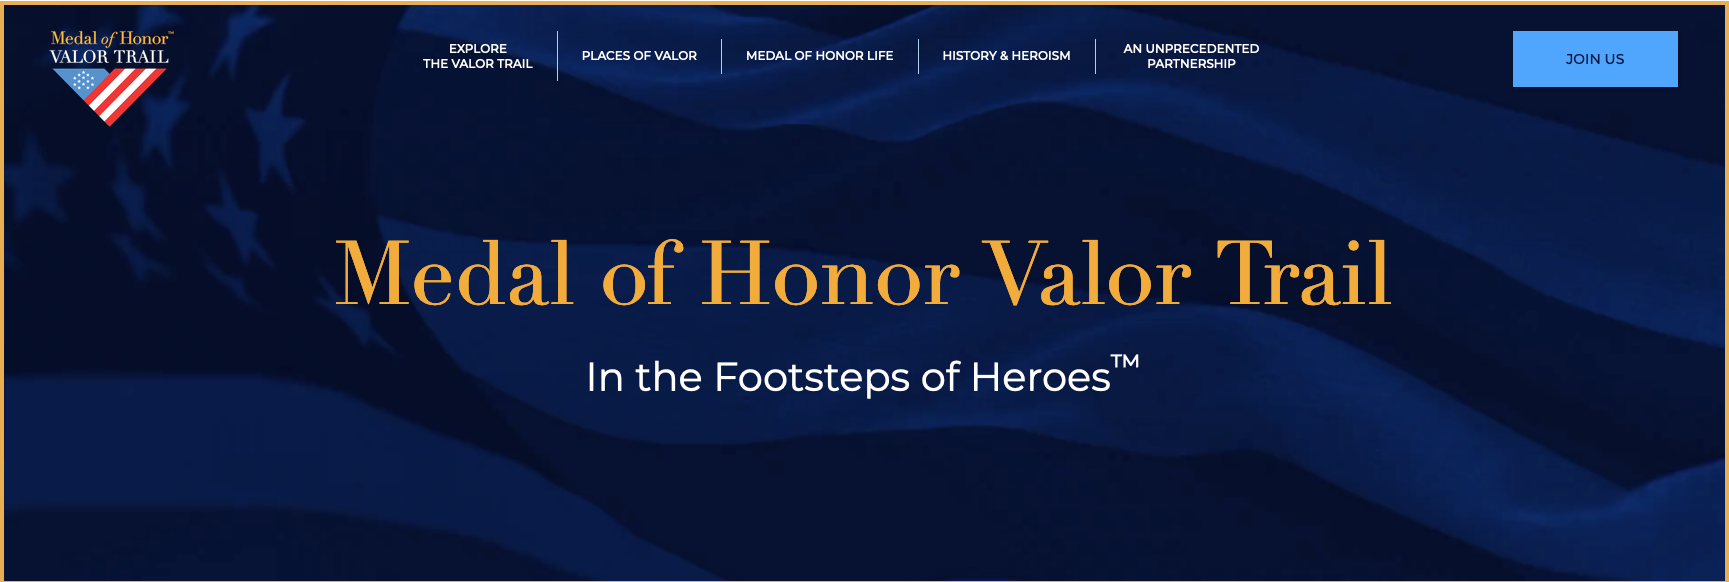 Medal of Honor Valor Trail homepage In the Footsteps of Heroes